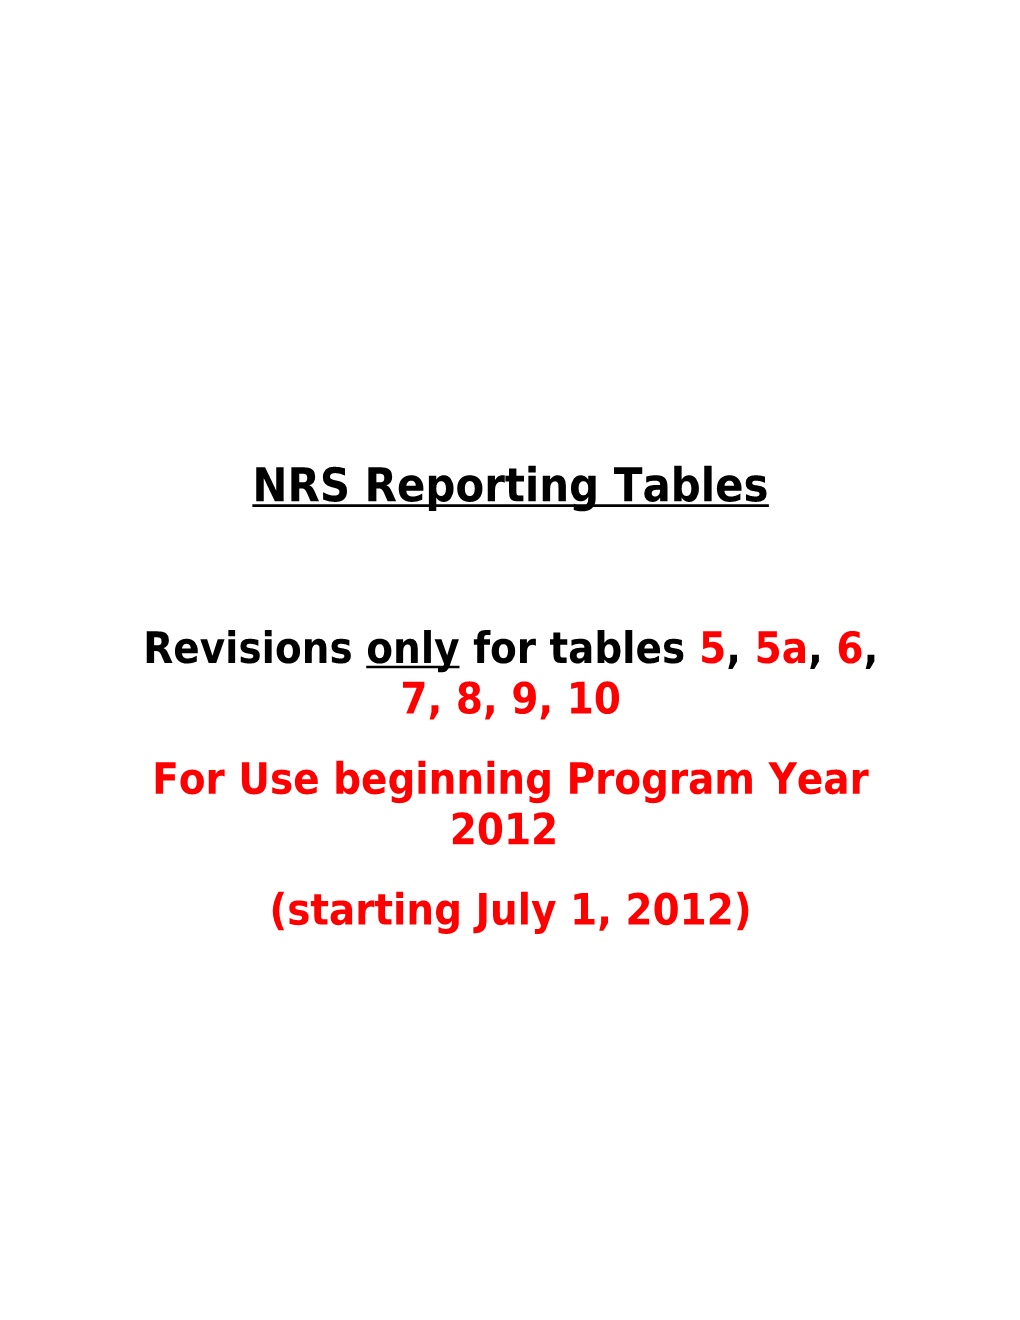 NRS Reporting Tables